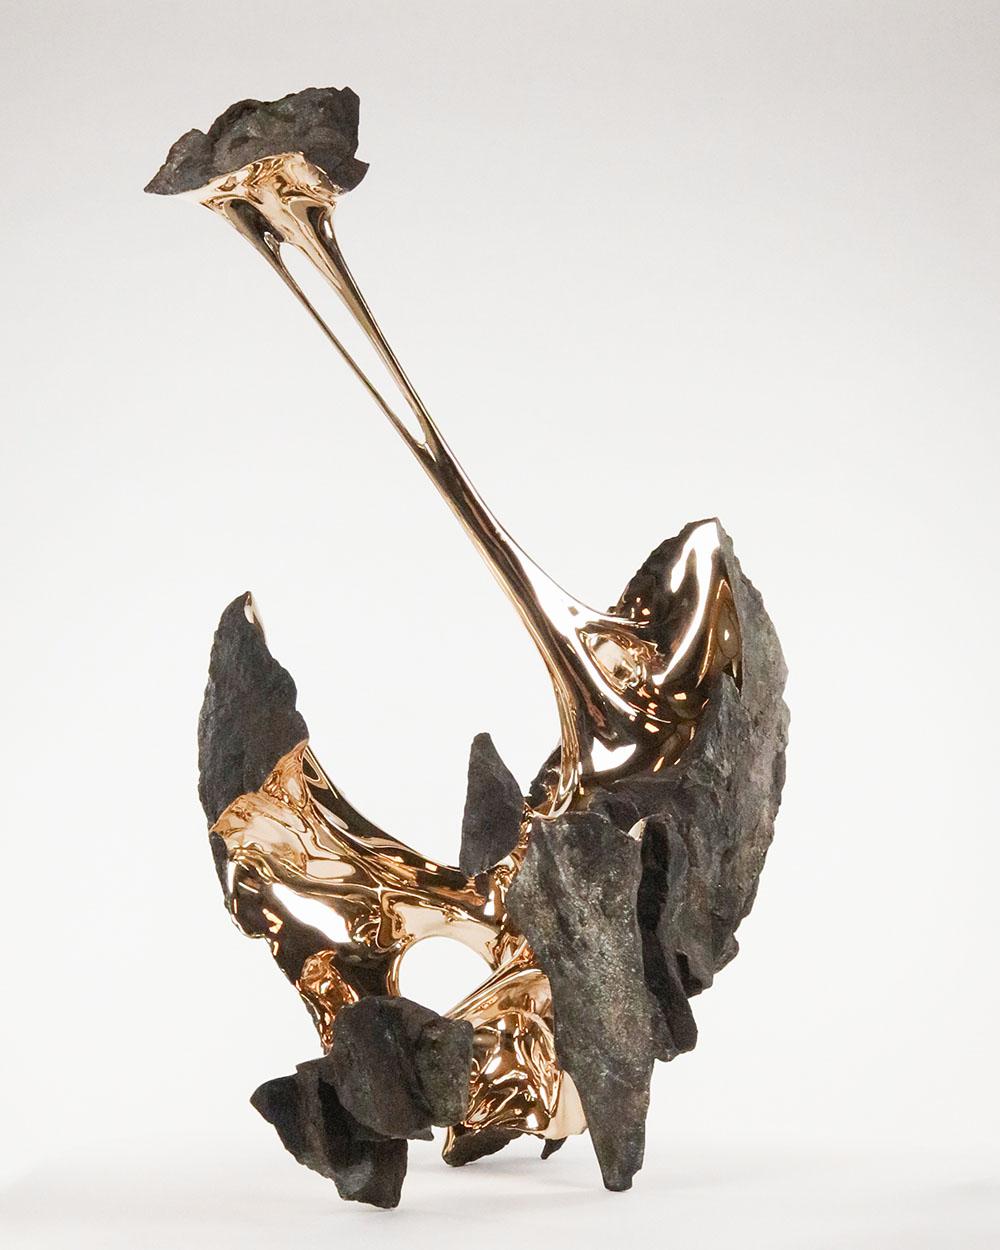 Serendipity by Romain Langlois - Gold tone polished bronze sculpture, abstract